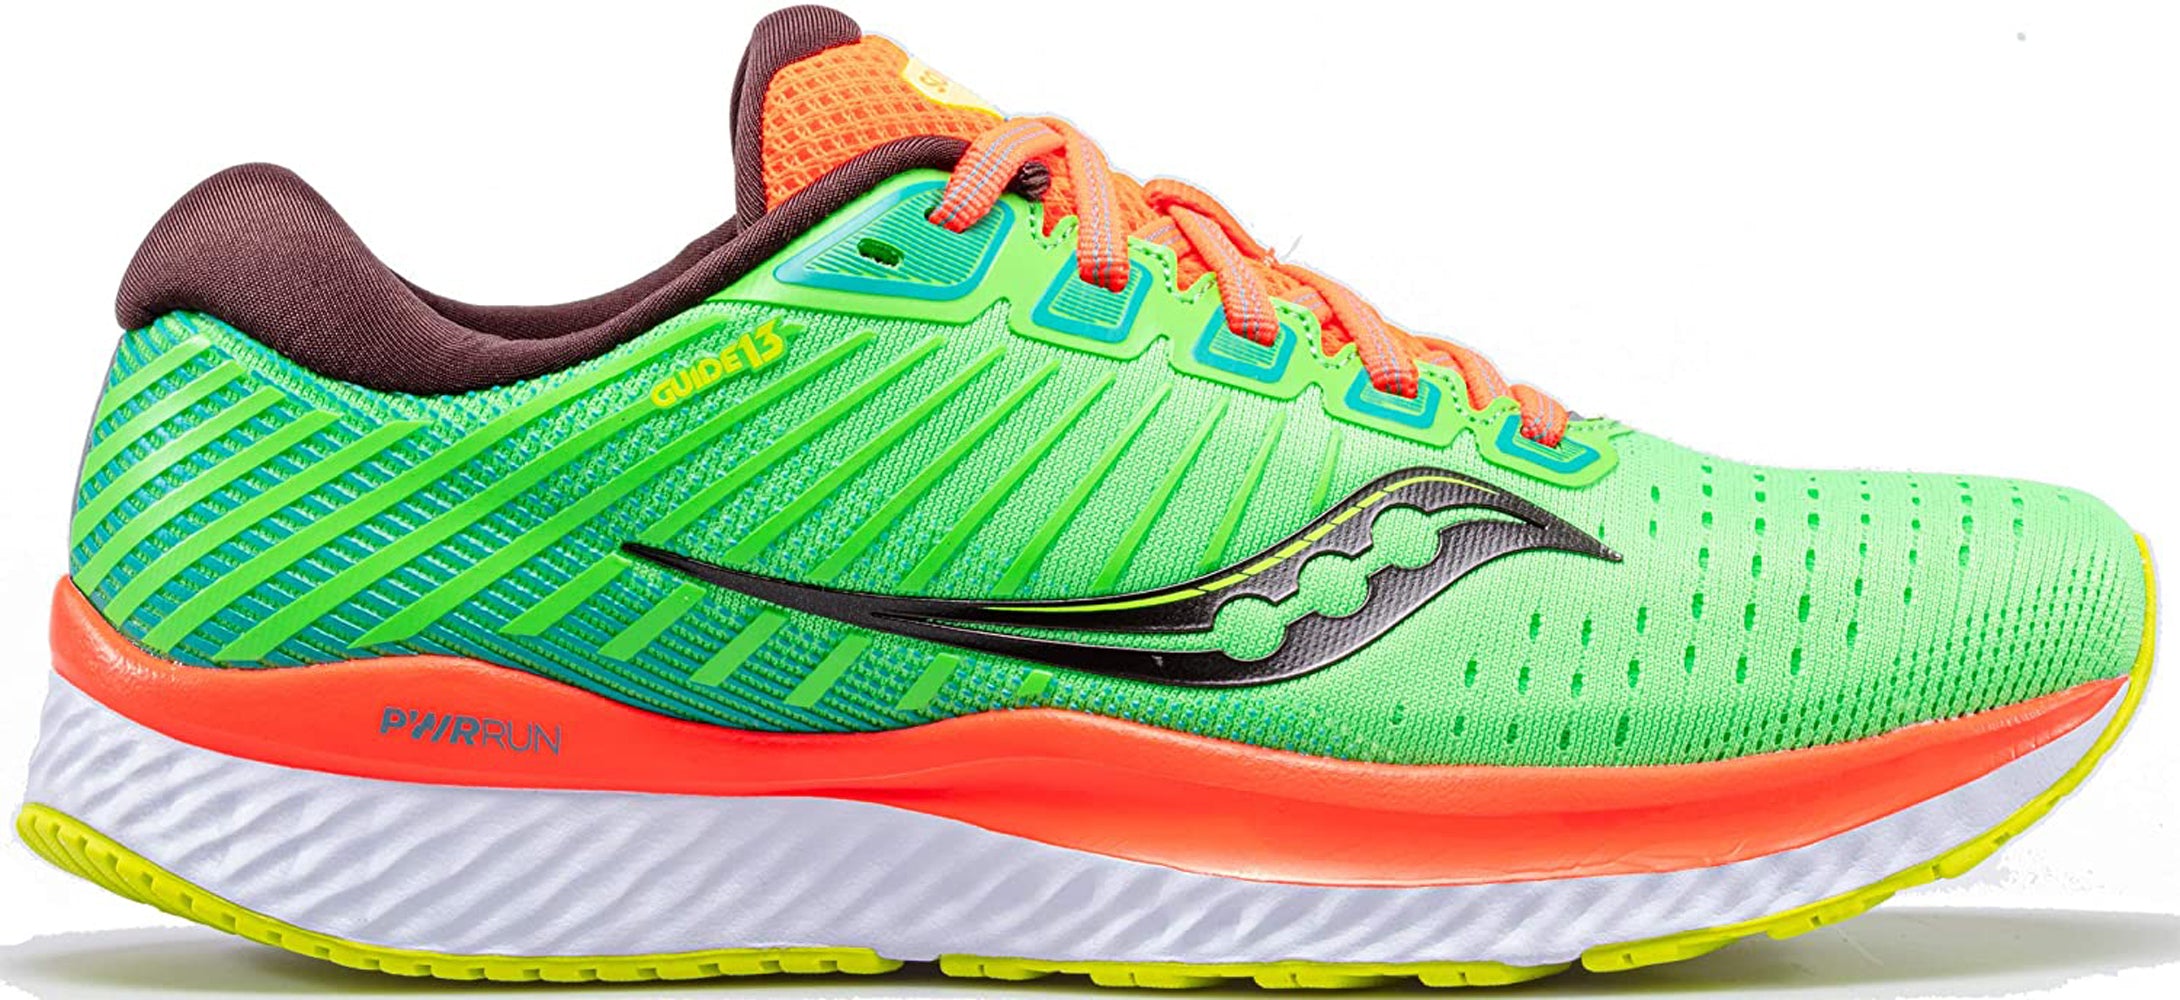 Saucony Women's Guide 13 Running Shoe in Green Mutant Side Angle View